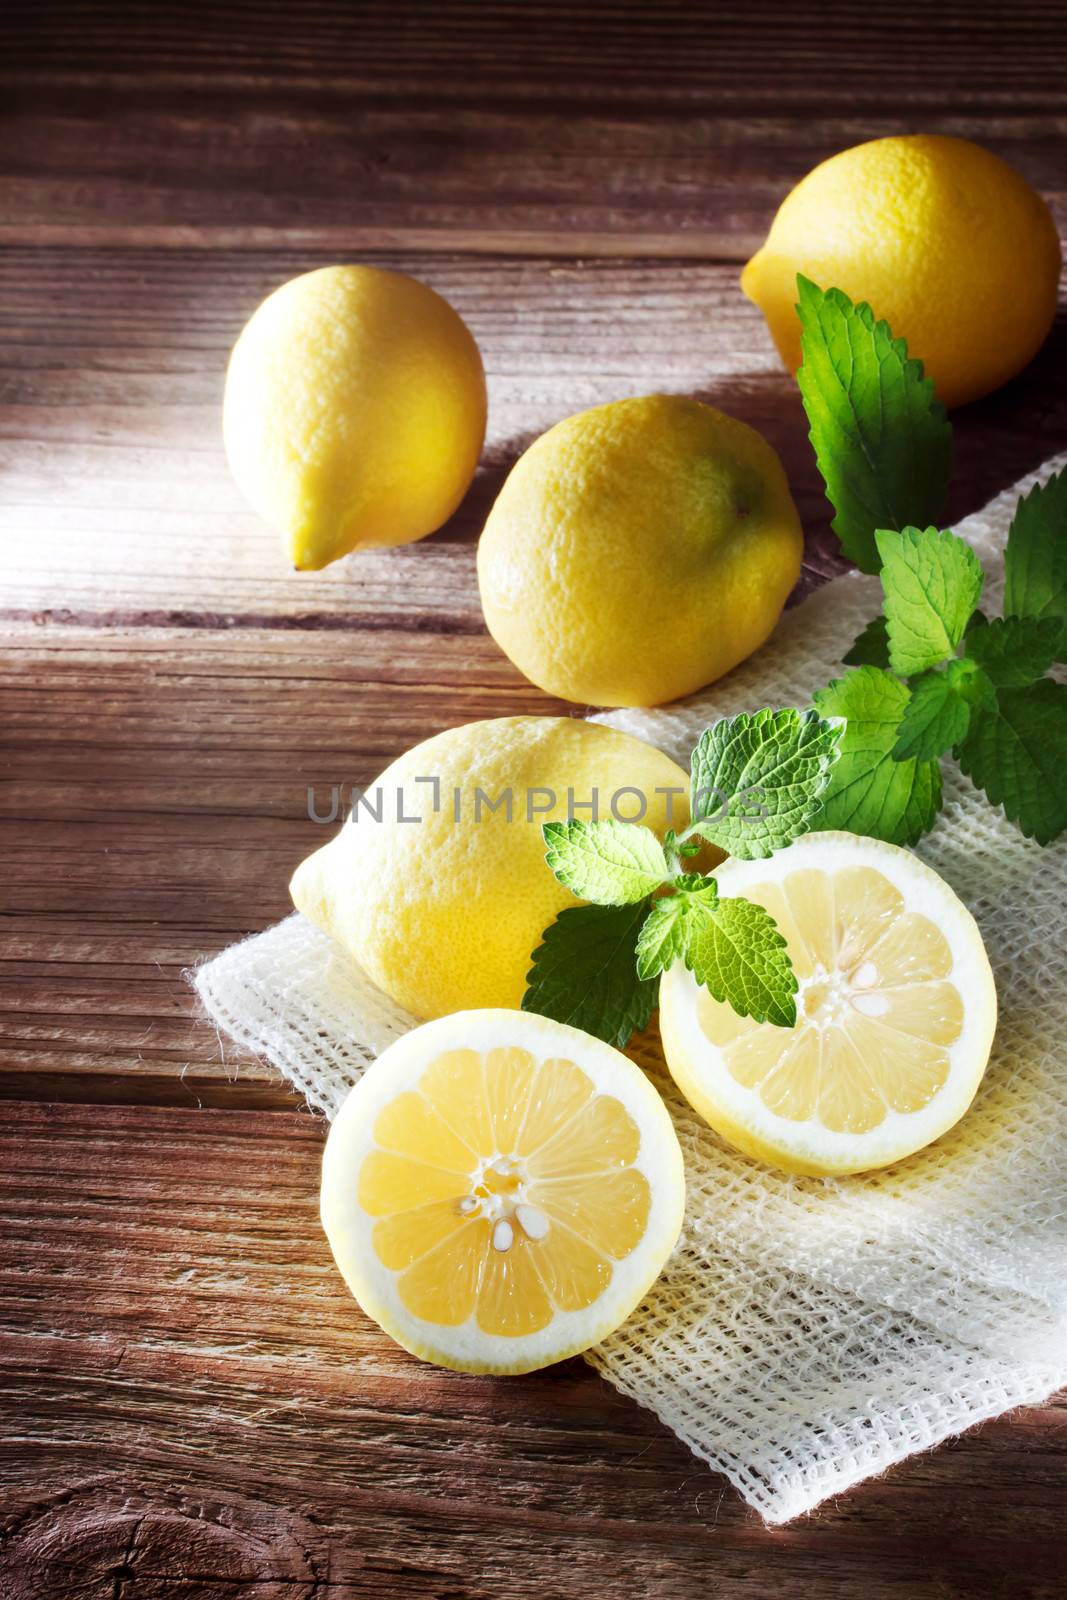 Lemons on a rustic table of wood with a sprig of mint